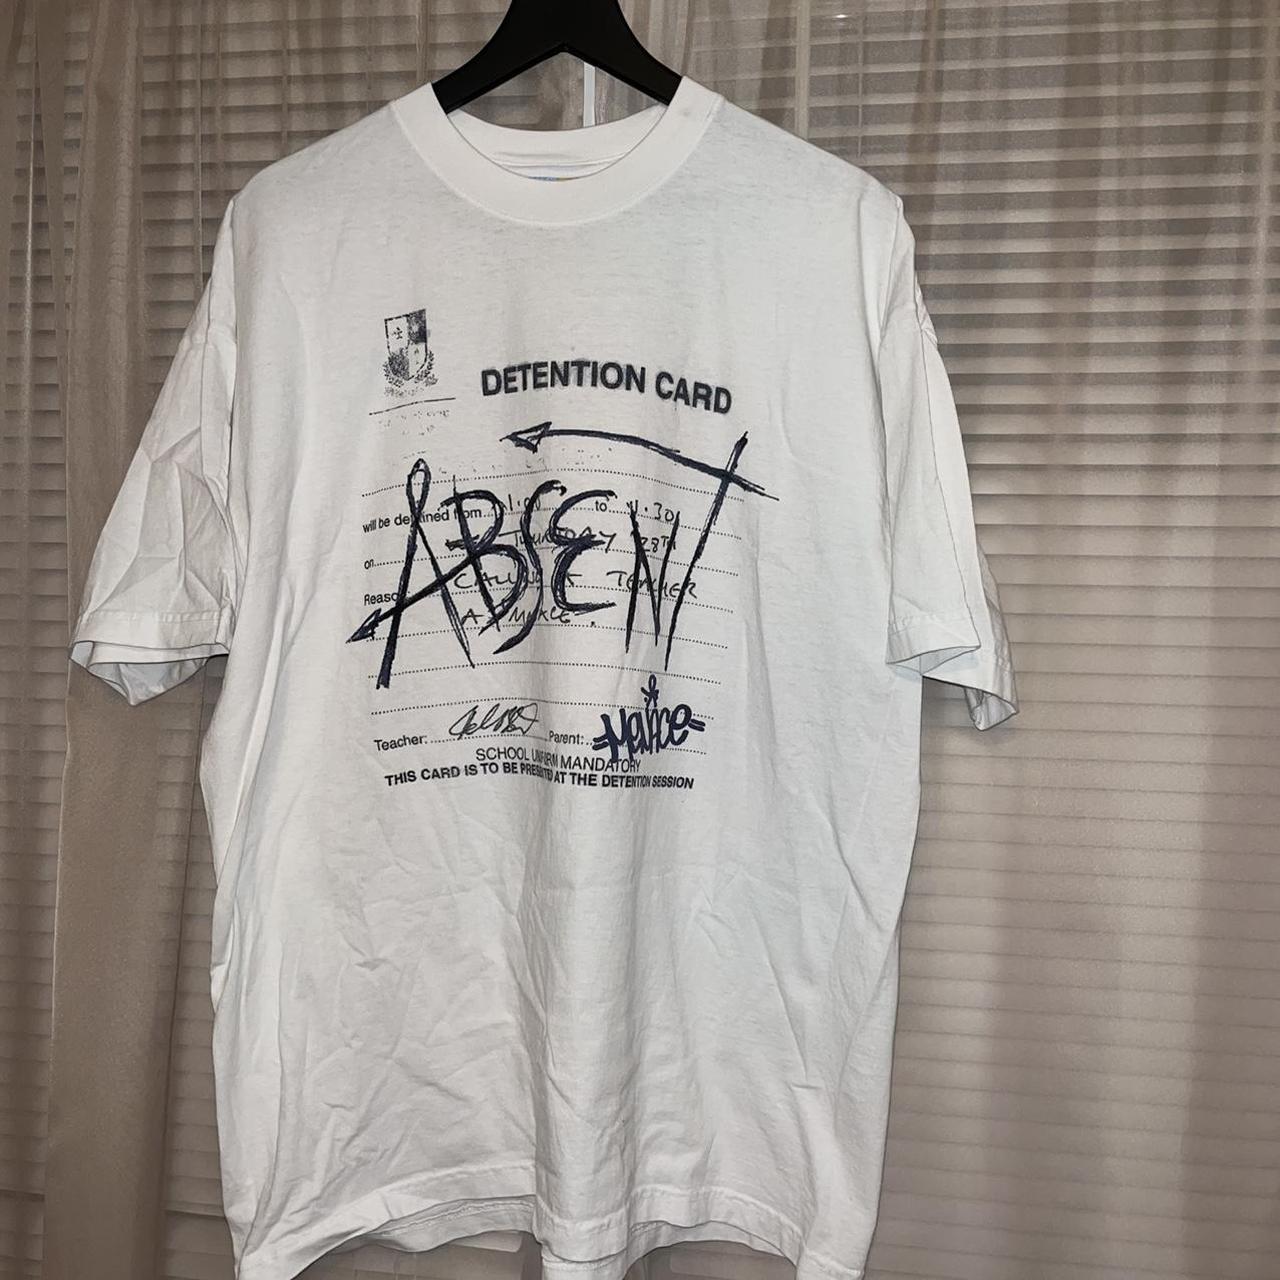 Product Image 1 - absent x menace collab tee

size